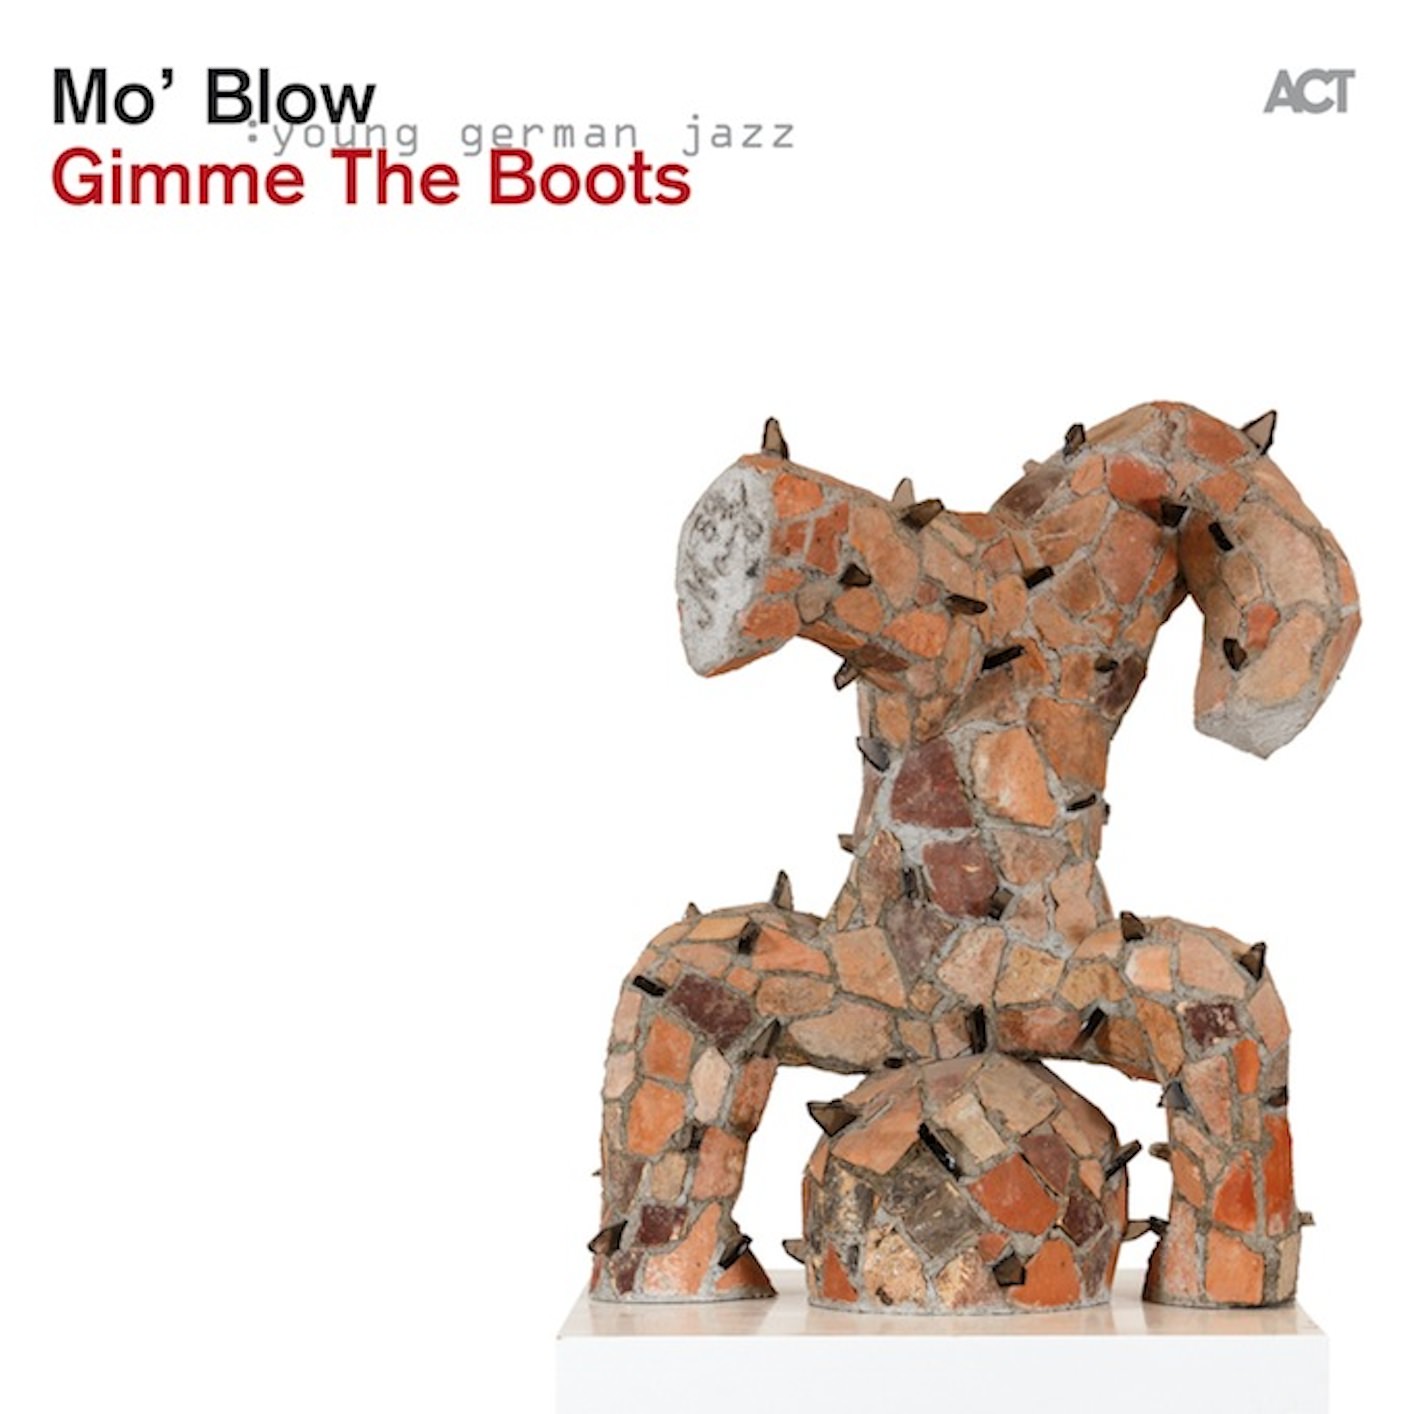 Mo’ Blow - Gimme The Boots (2013/2014) [ProStudioMasters FLAC 24bit/88,2kHz]